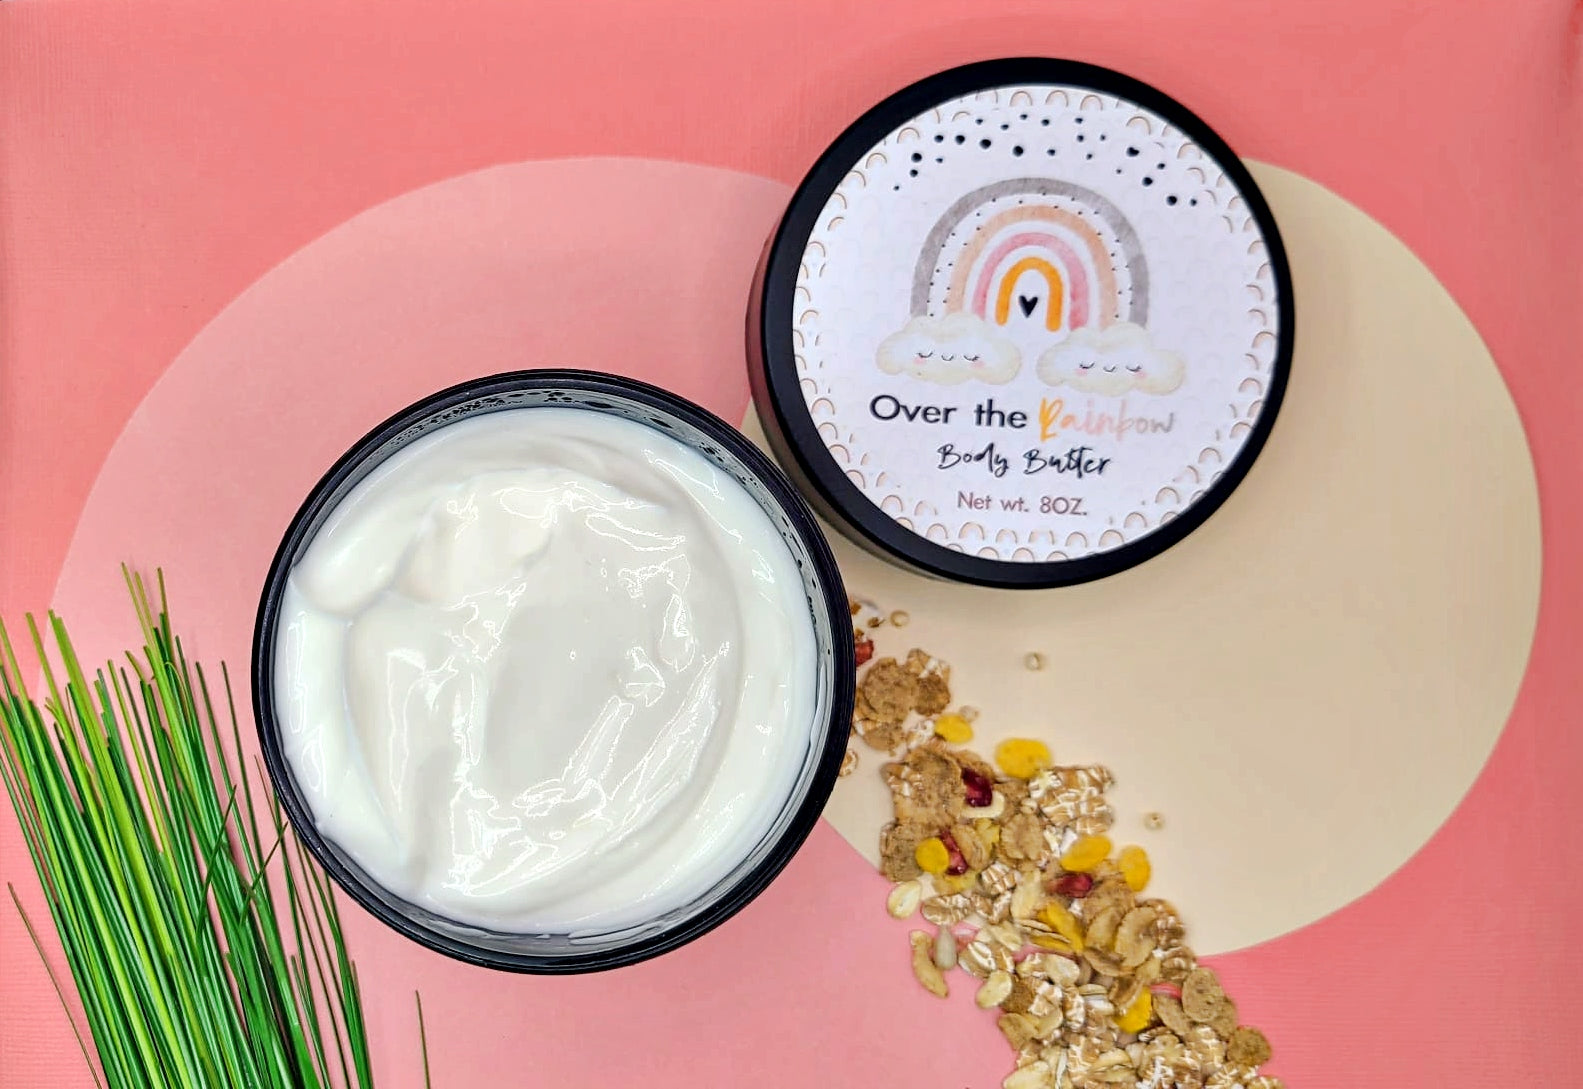 Over the rainbow body butter